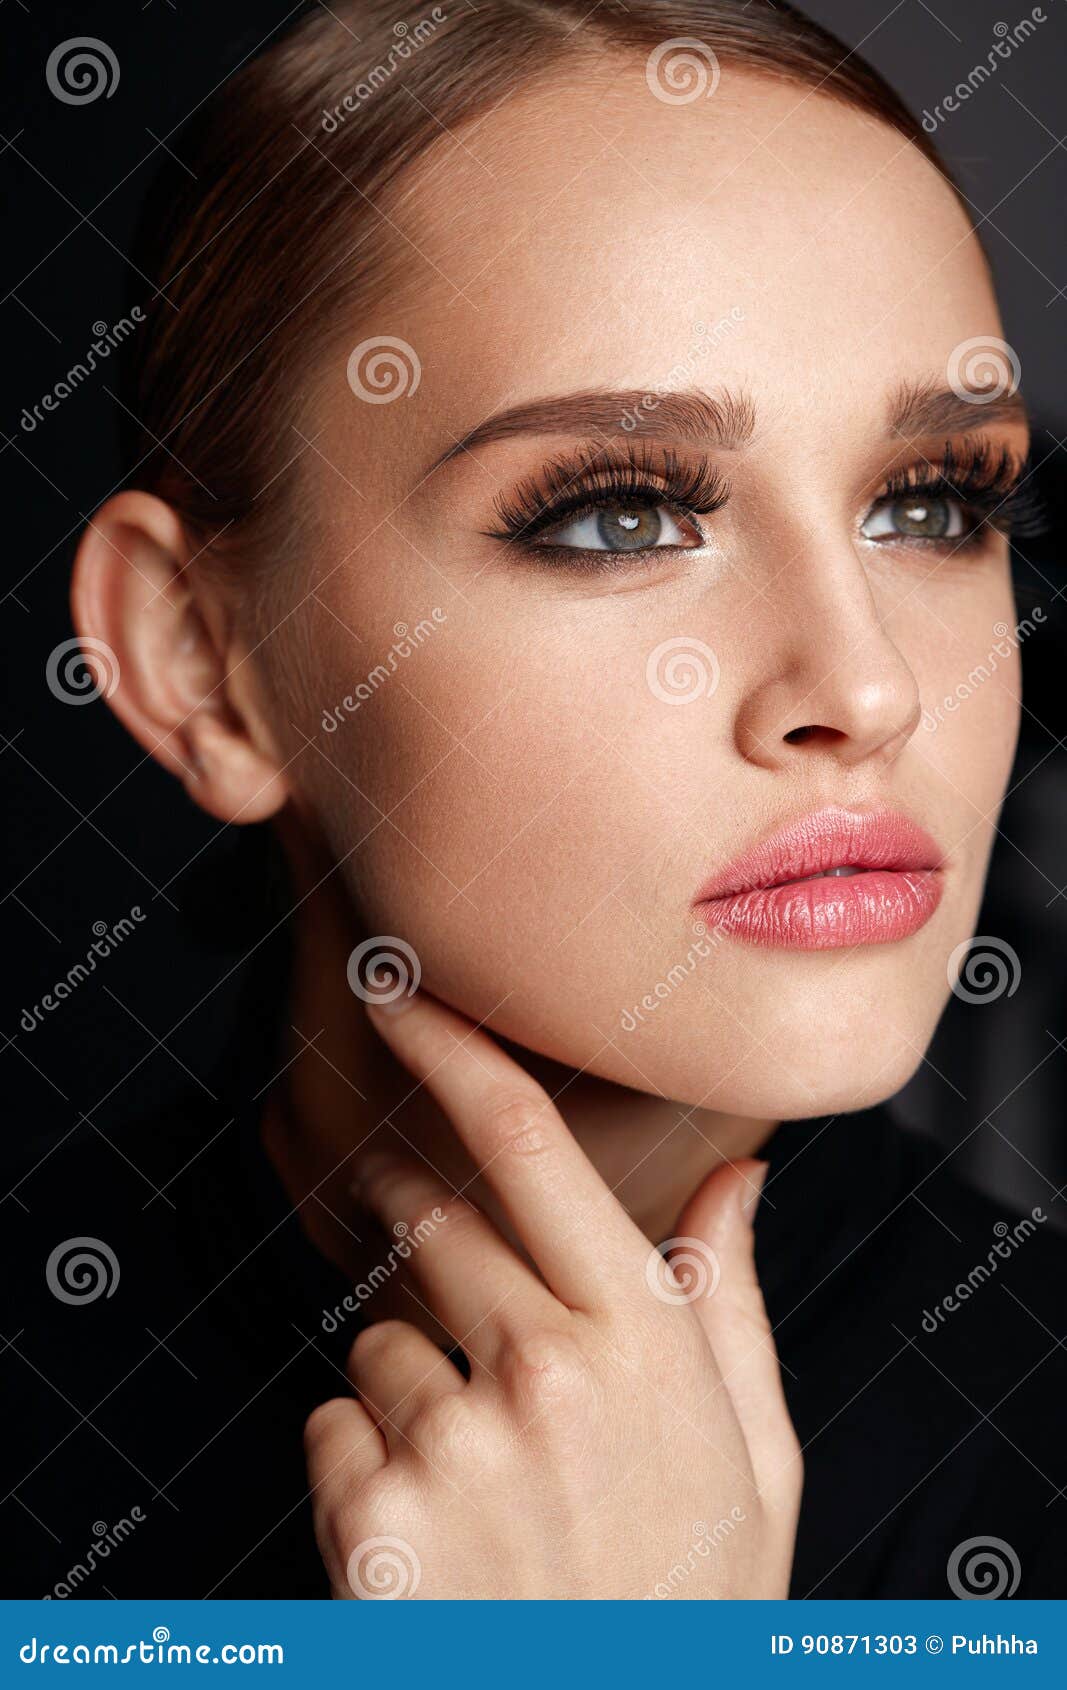 beautiful girl with beauty face, makeup and long black eyelashes